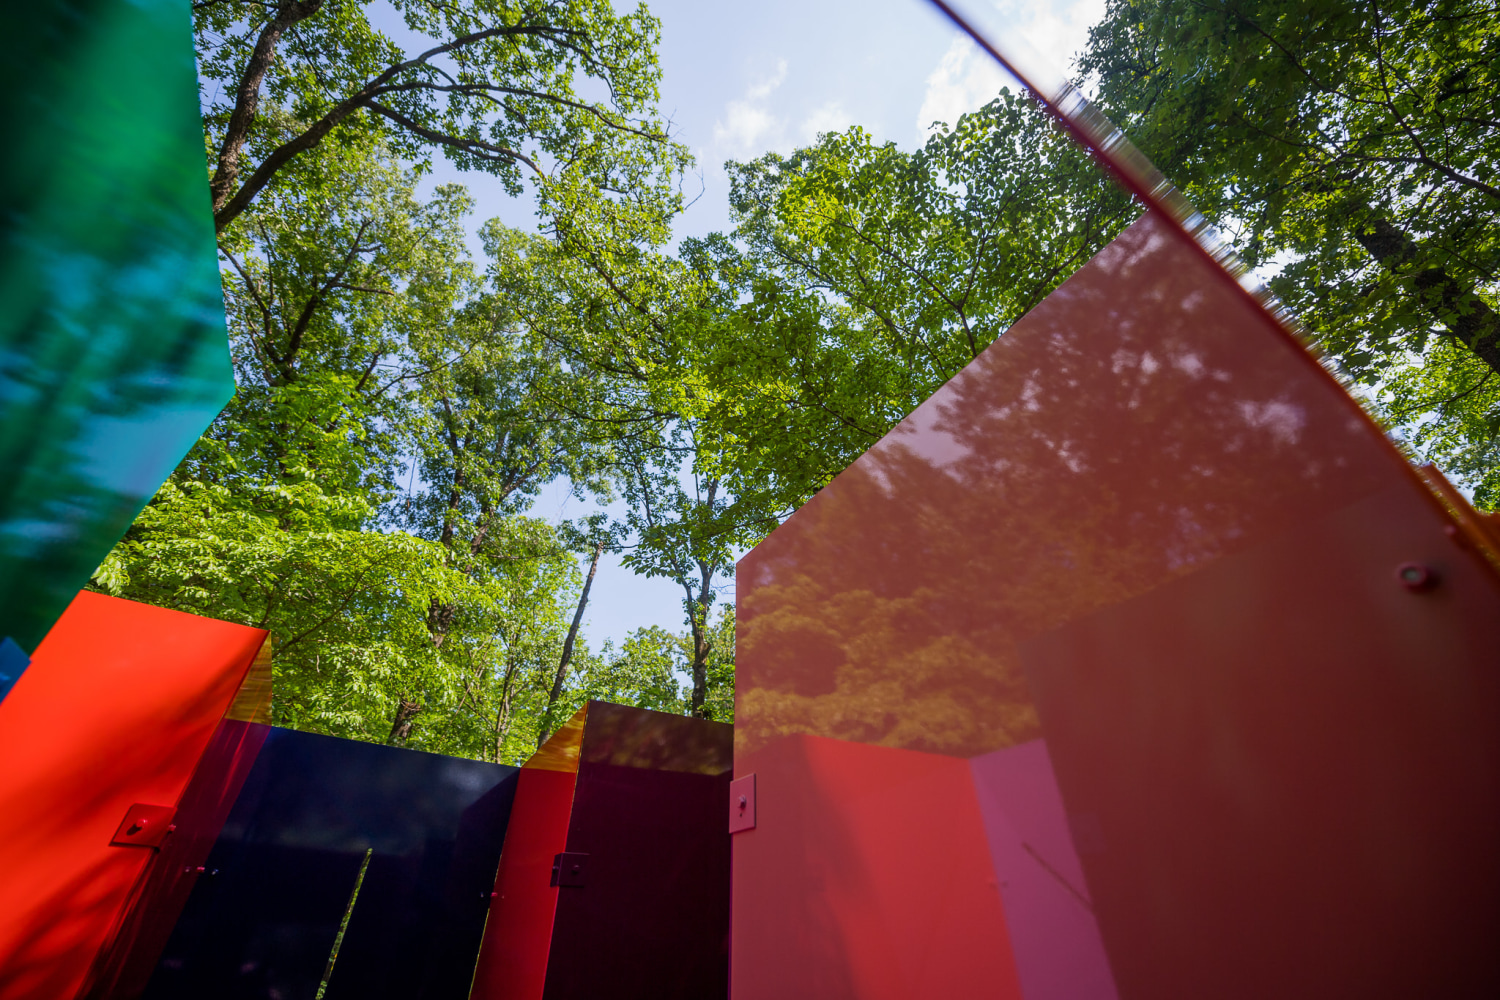 Sam Falls

Untitled (Maze)

2014

UV powder coated aluminum, Non-UV powder coated aluminum, UV exterior powder coated stainless steel brackets

96 x 144 x 144 inches (243.8 x 365.8 x 365.8 cm)

SFA 232

&amp;nbsp;

INQUIRE